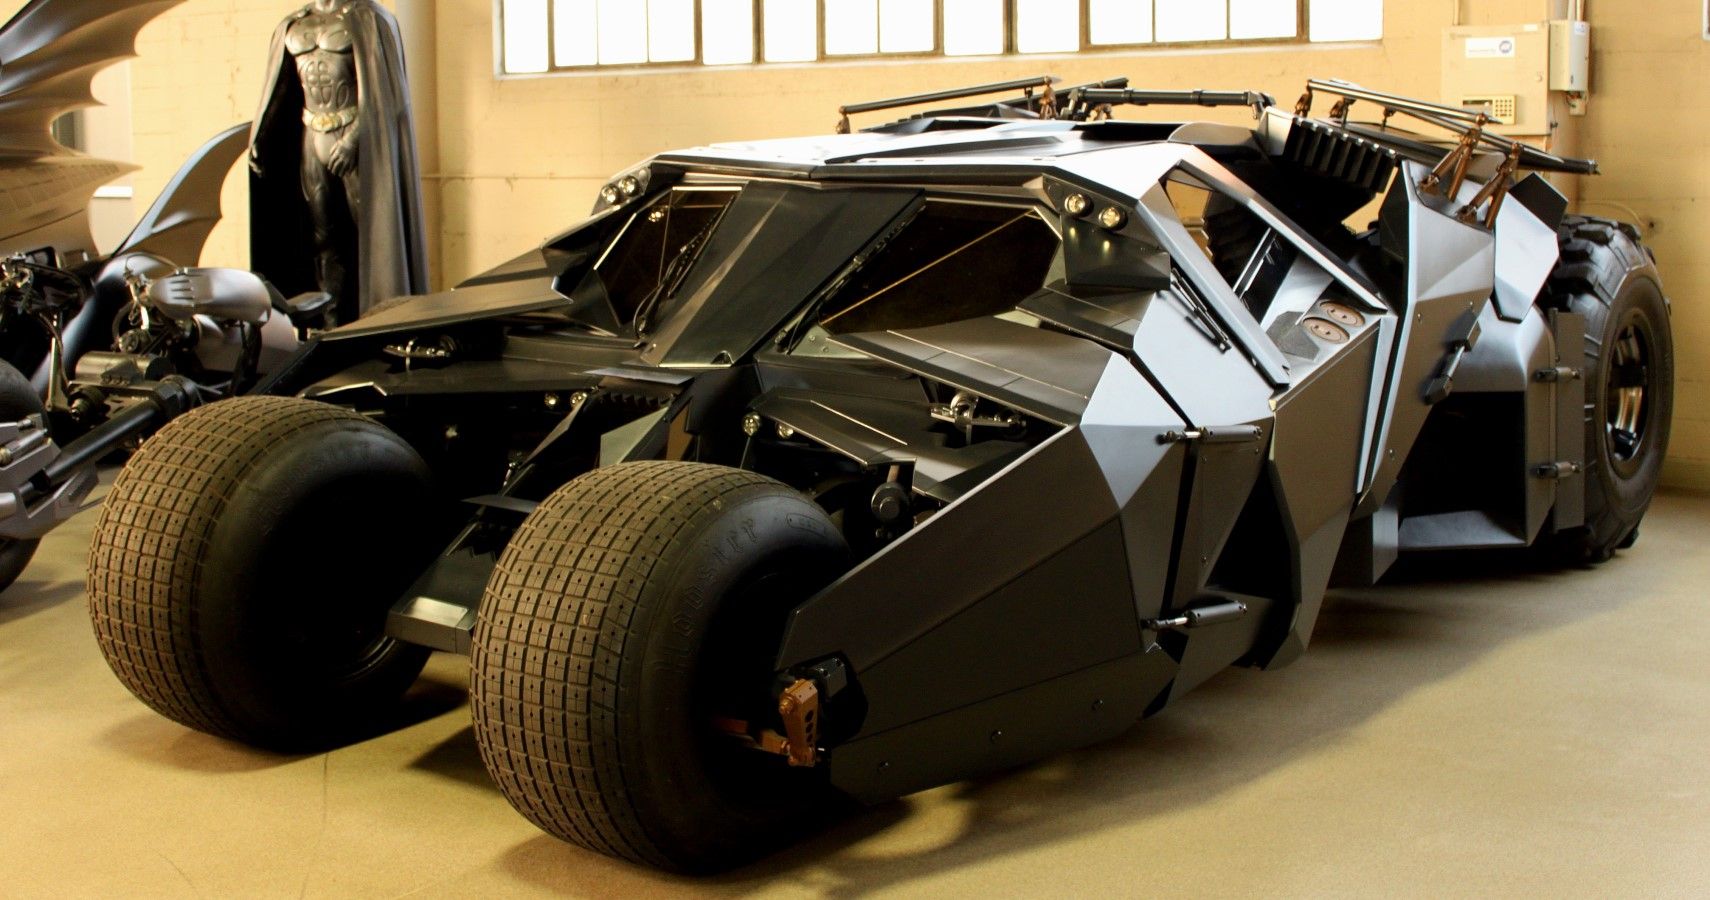 New Batman movie: Want your own Batmobile? Here's what it costs